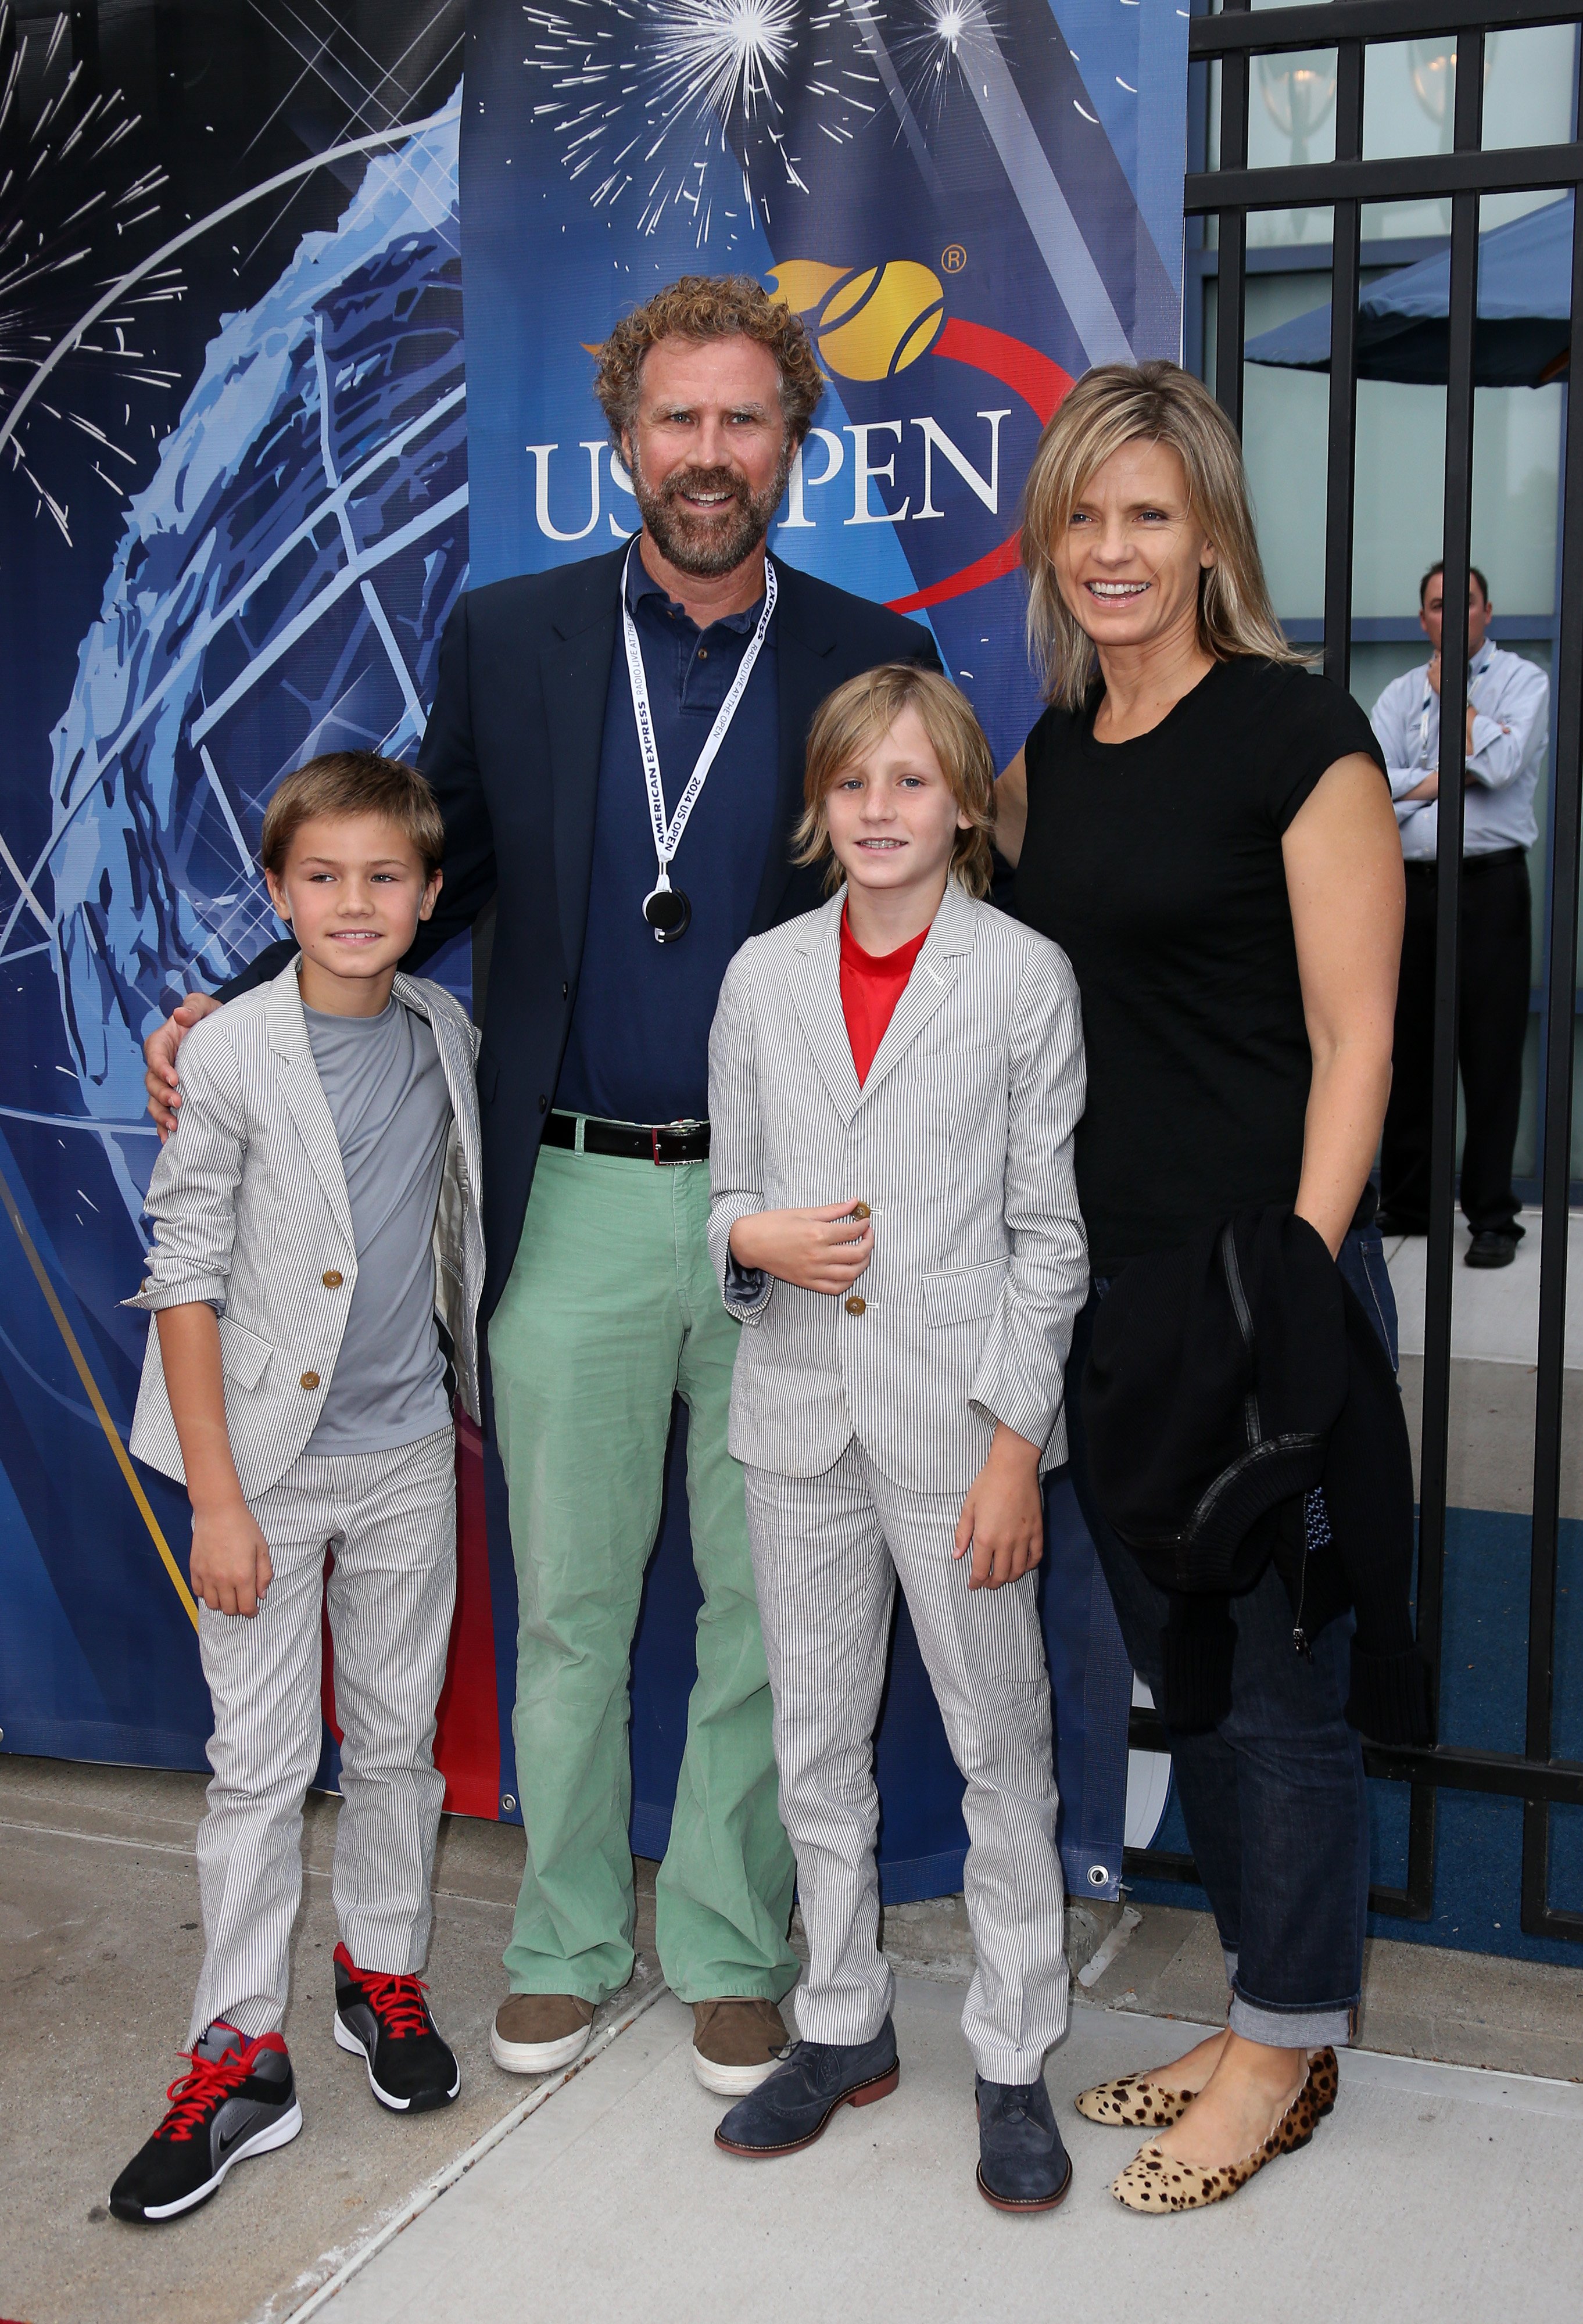 Will Ferrell, his wife Viveca Paulin, and their sons Mattias and Magnus Ferrell attend the 2014 US Open at USTA Billie Jean King National Tennis Center on August 30, 2014, in New York City. | Source: Getty Images